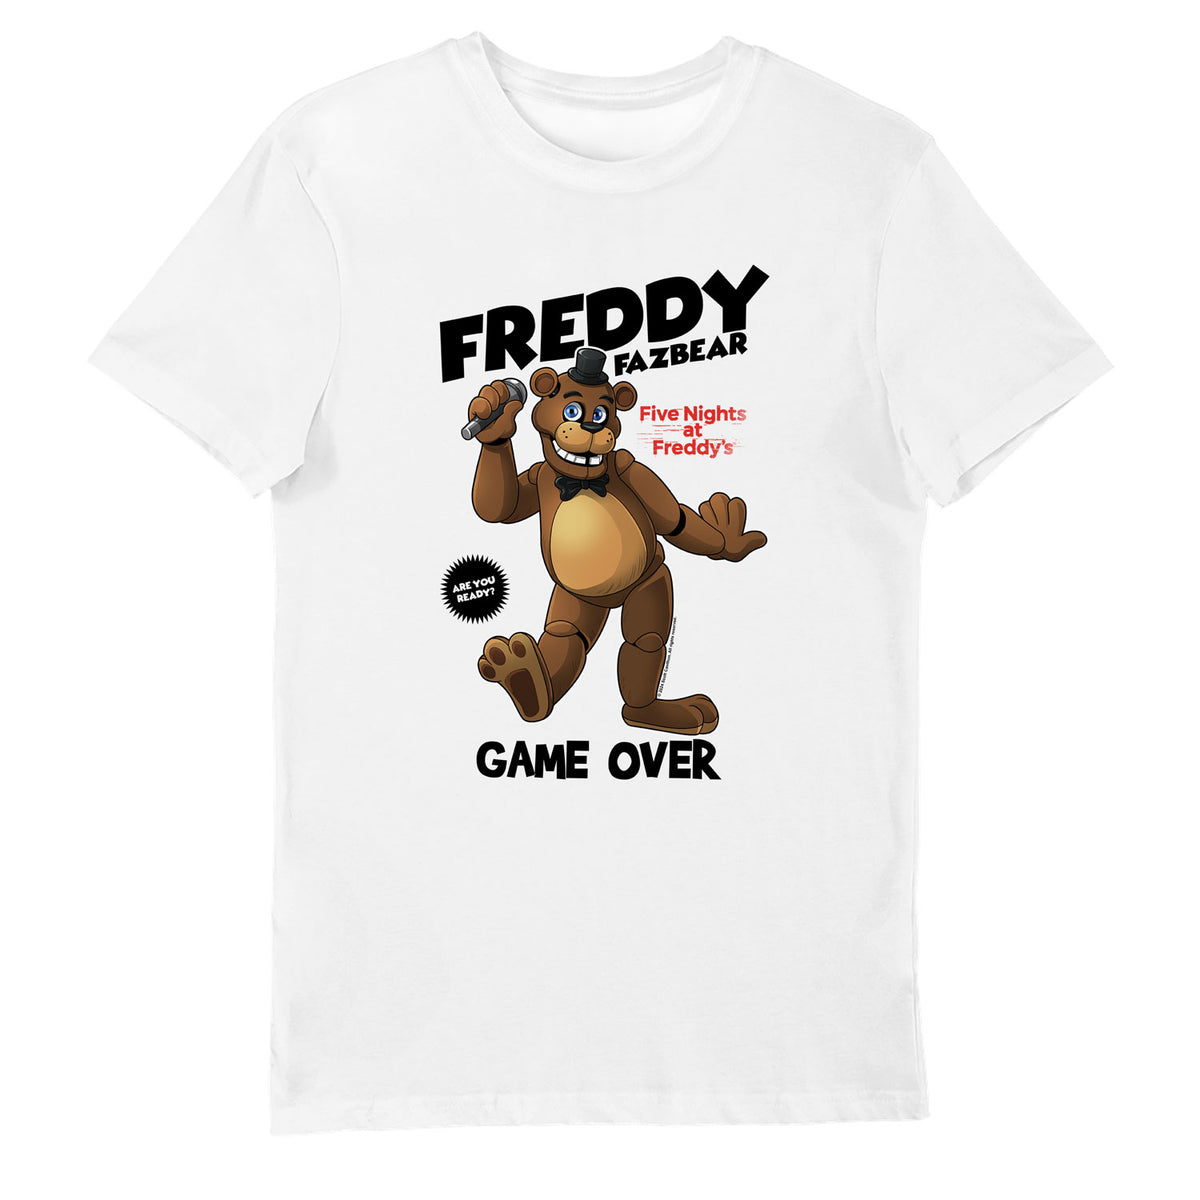 Five Nights At Freddys Game Over T-Shirt